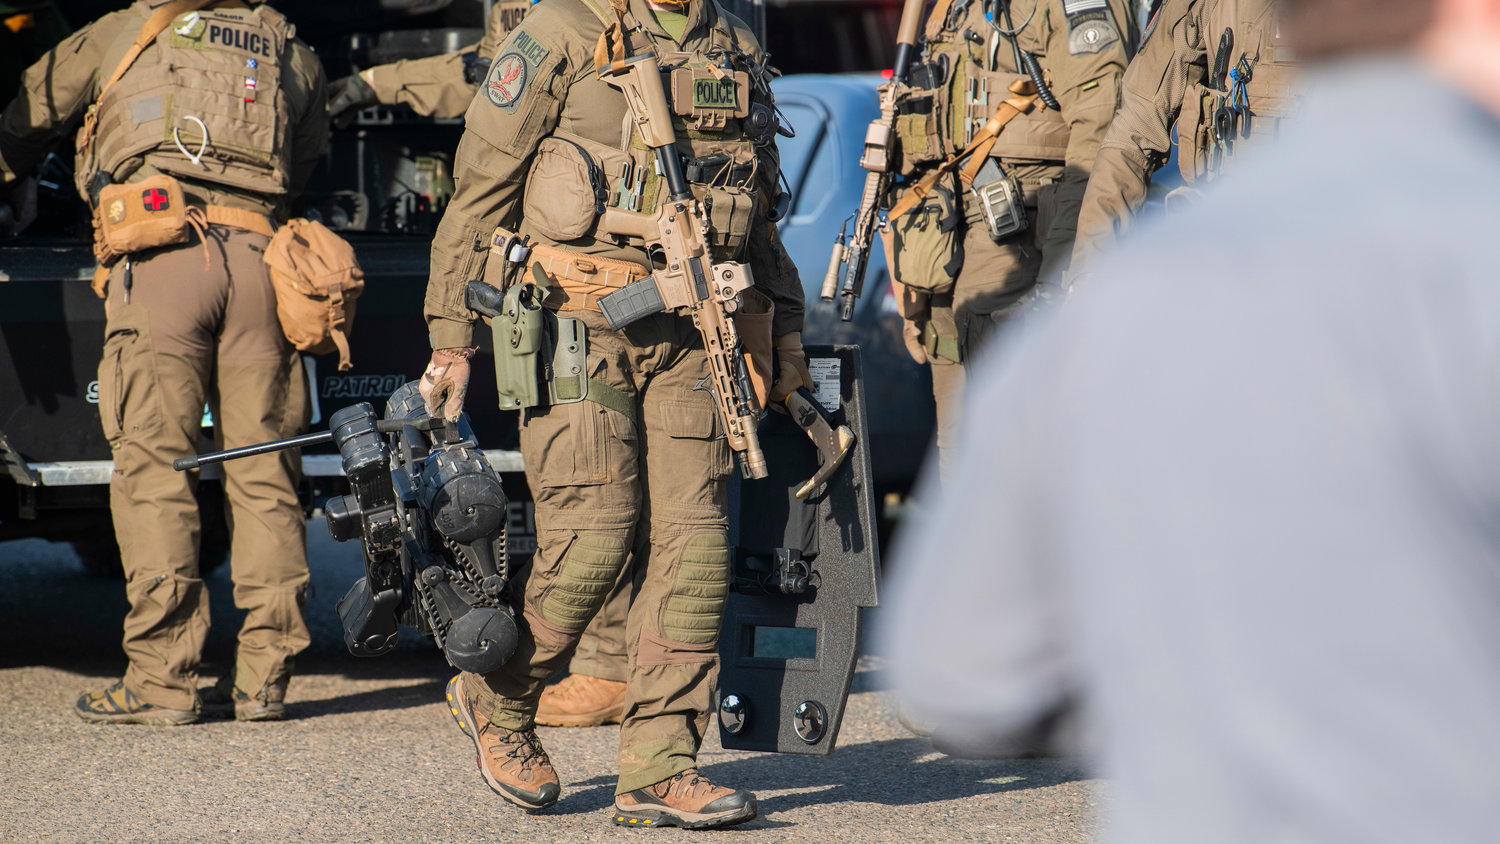 SWAT members carry shields, weapons and robots through an active scene in the 1300 block of Windsor Avenue in Centralia on Thursday.